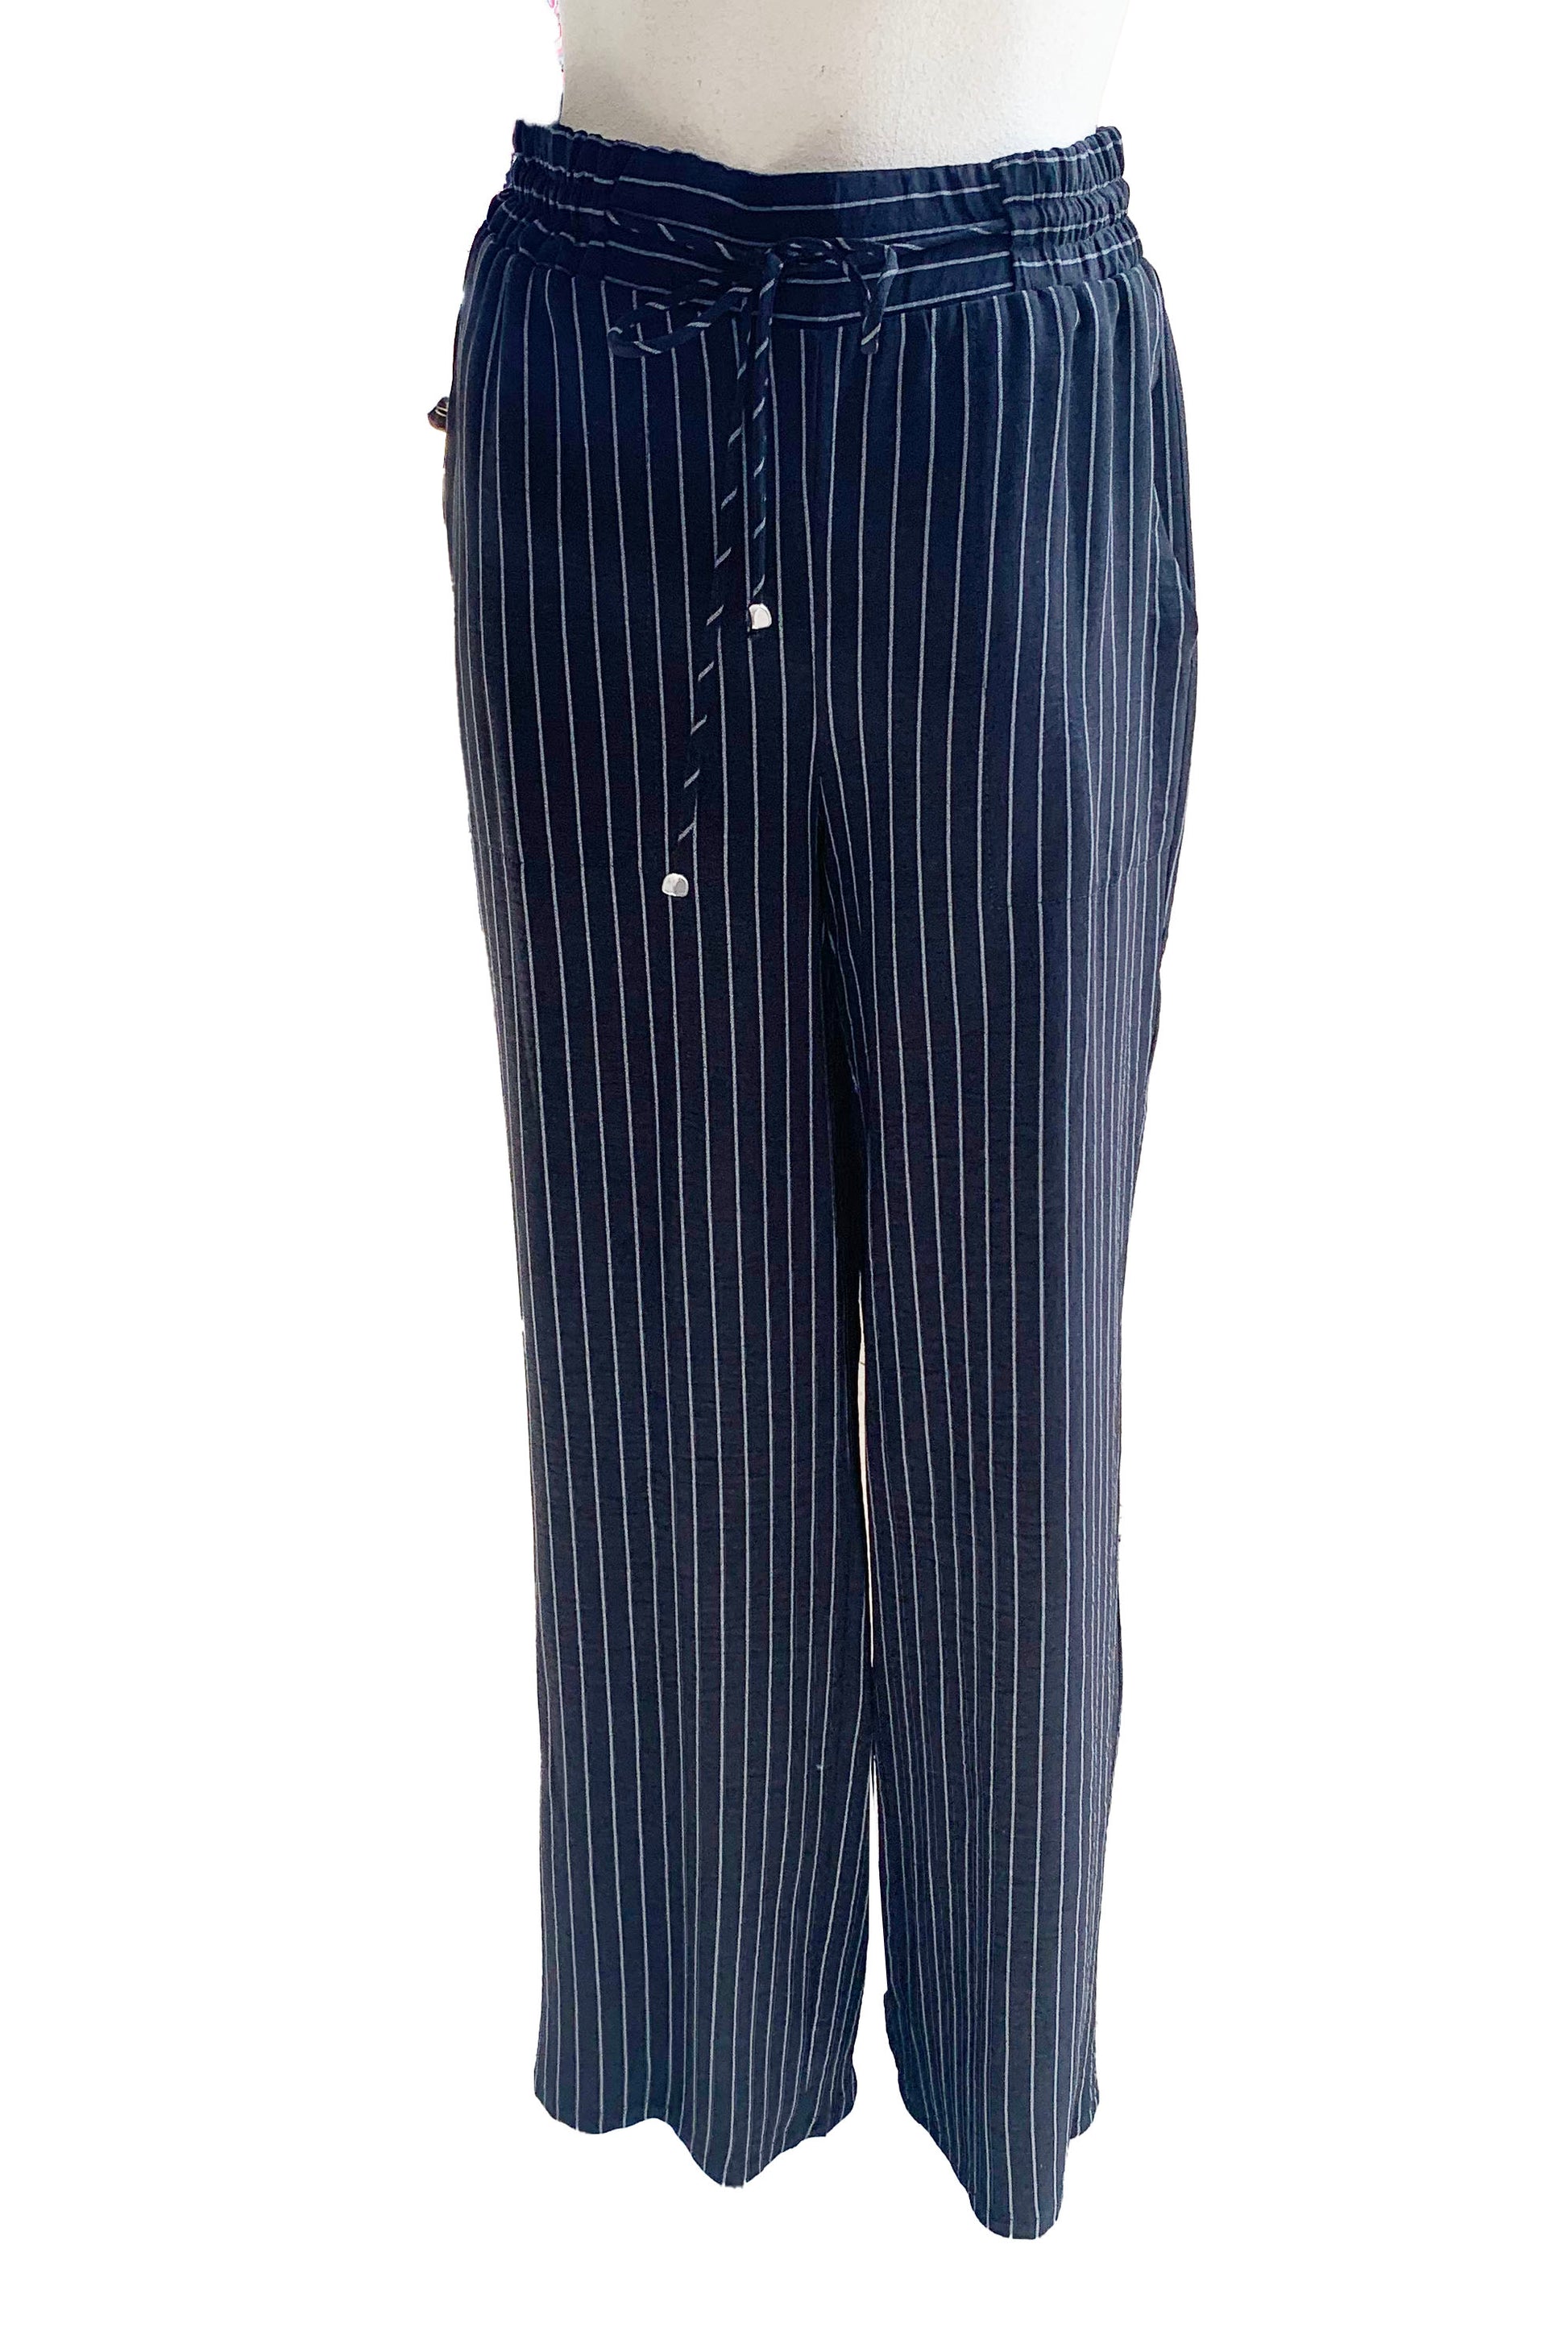 The Cheyenne Pants by Pure Essence in Black pinstripe are show on a mannequin in front of a white background 